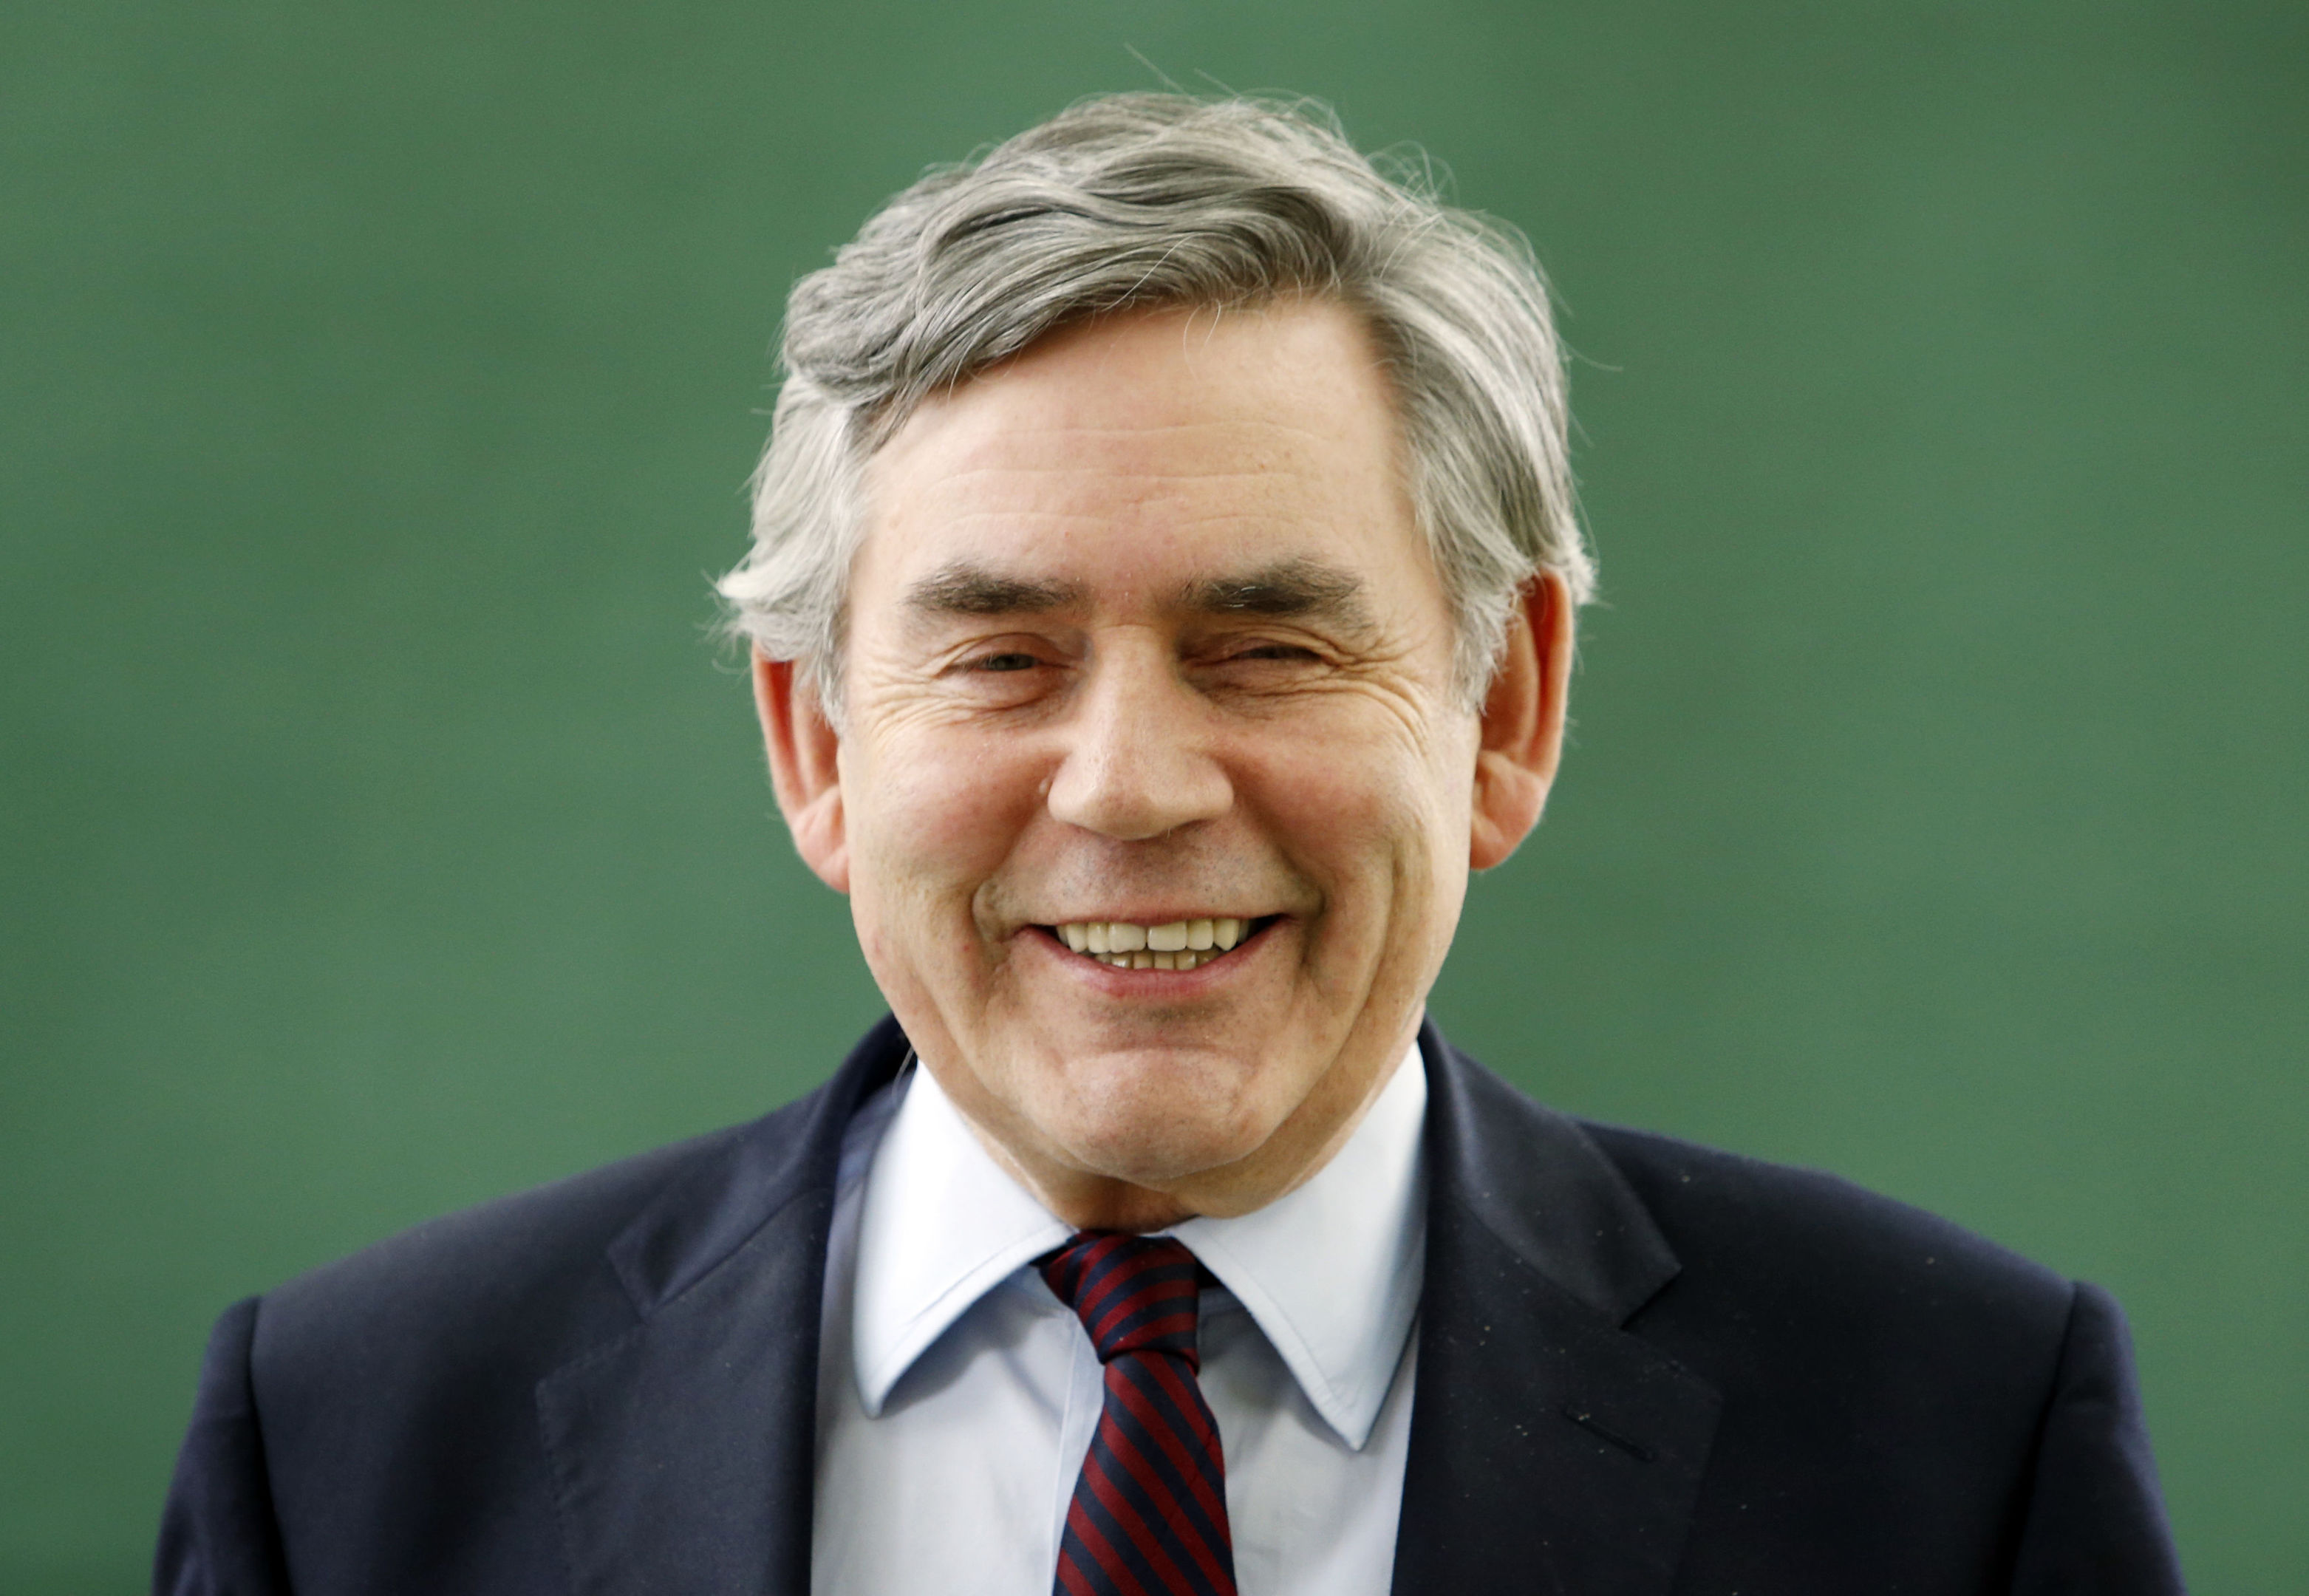 Gordon Brown who says that Scotland could achieve a clear 70% majority in favour of staying in Europe if campaigners put forward a "positive, principled, progressive and patriotic" case. (Danny Lawson/PA Wire)